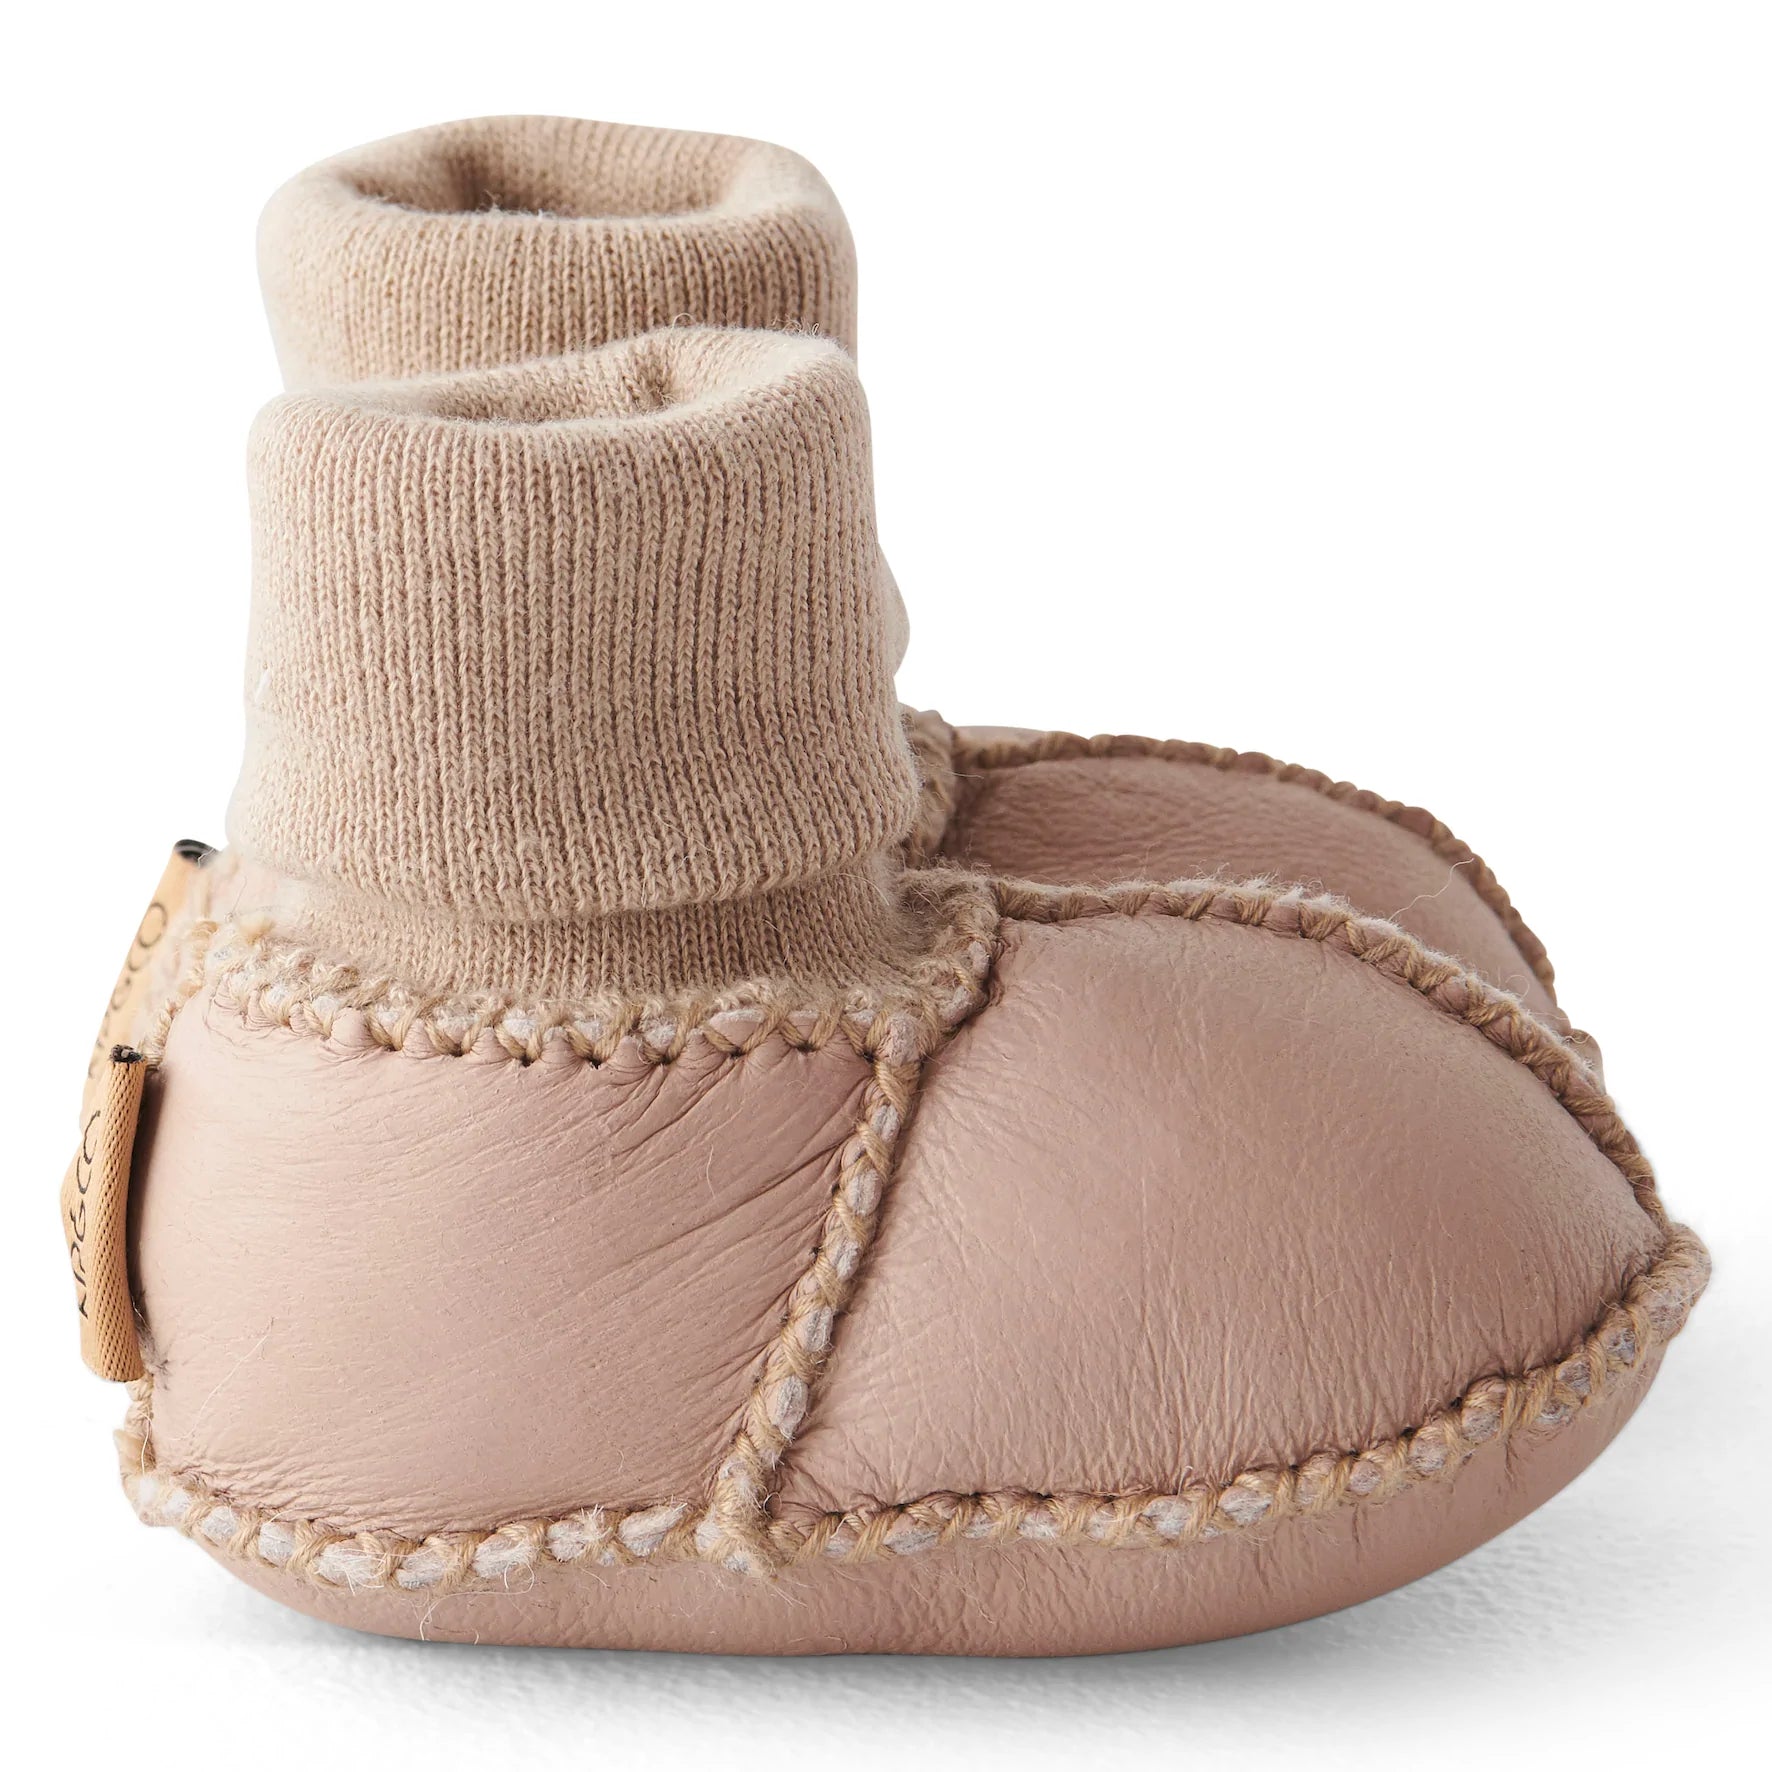 KIP & CO BABY BOOTS: NATURAL ALMOND